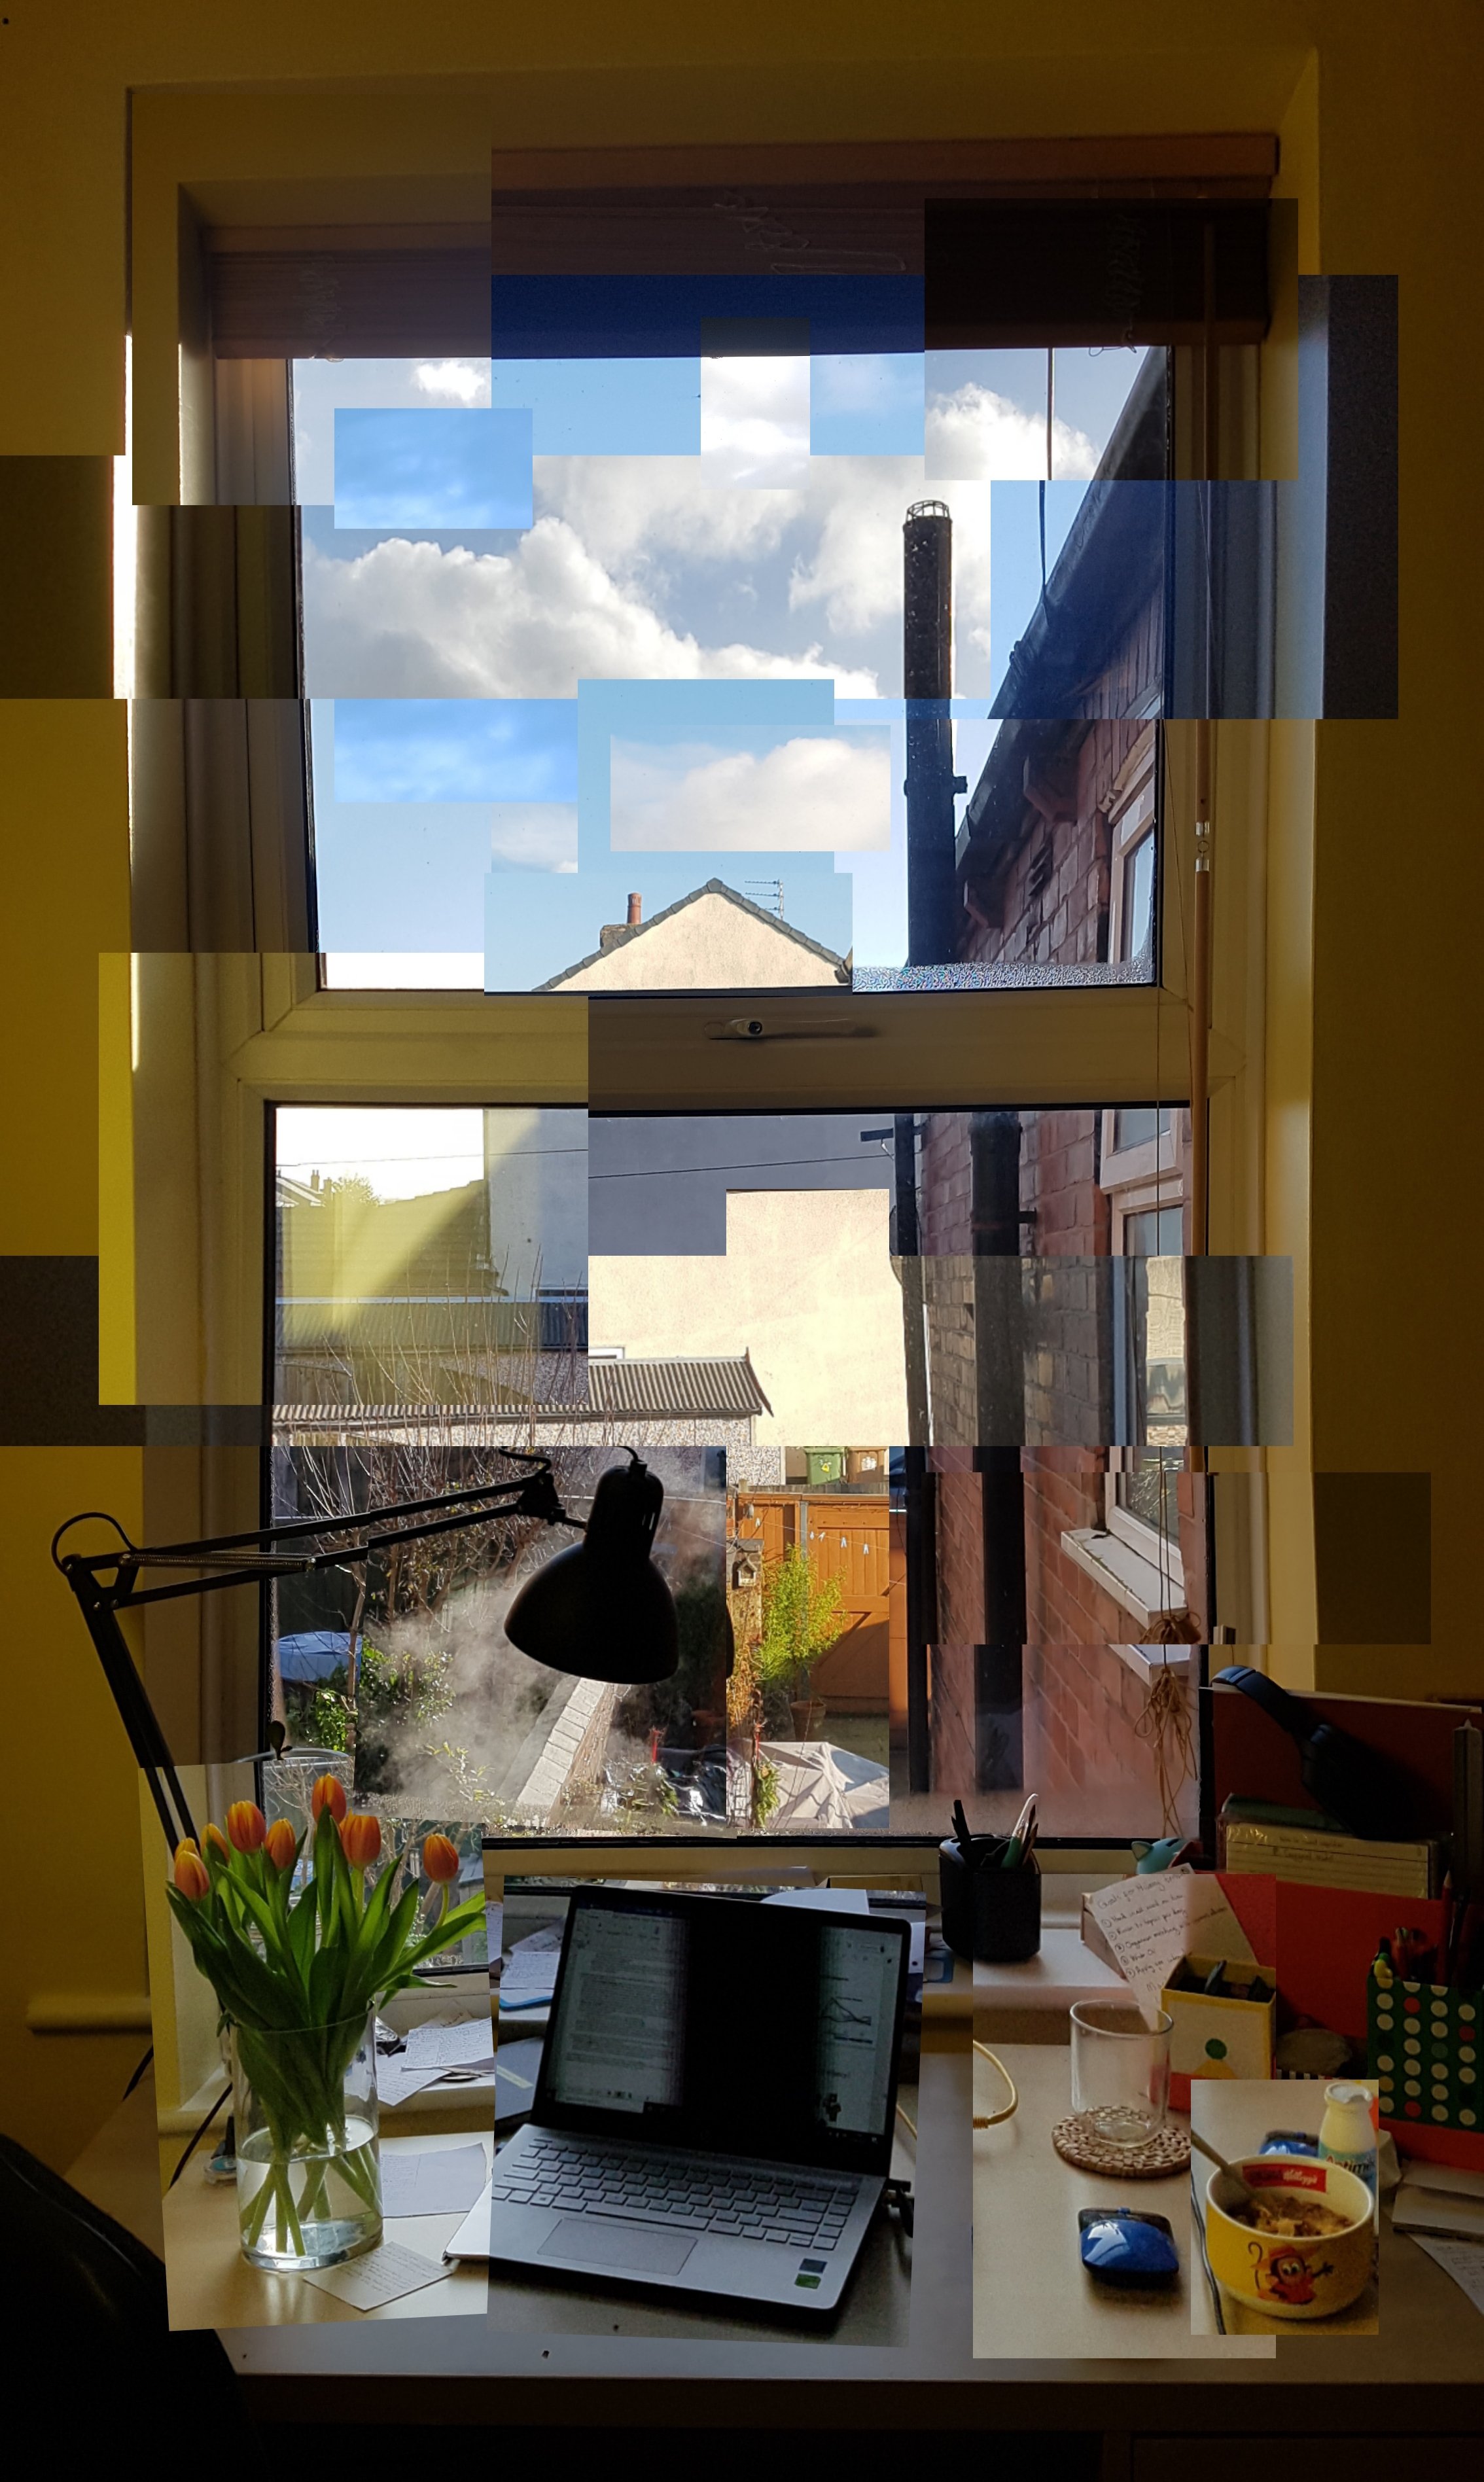 Competition winner Rhianna Watt: A Room with a View